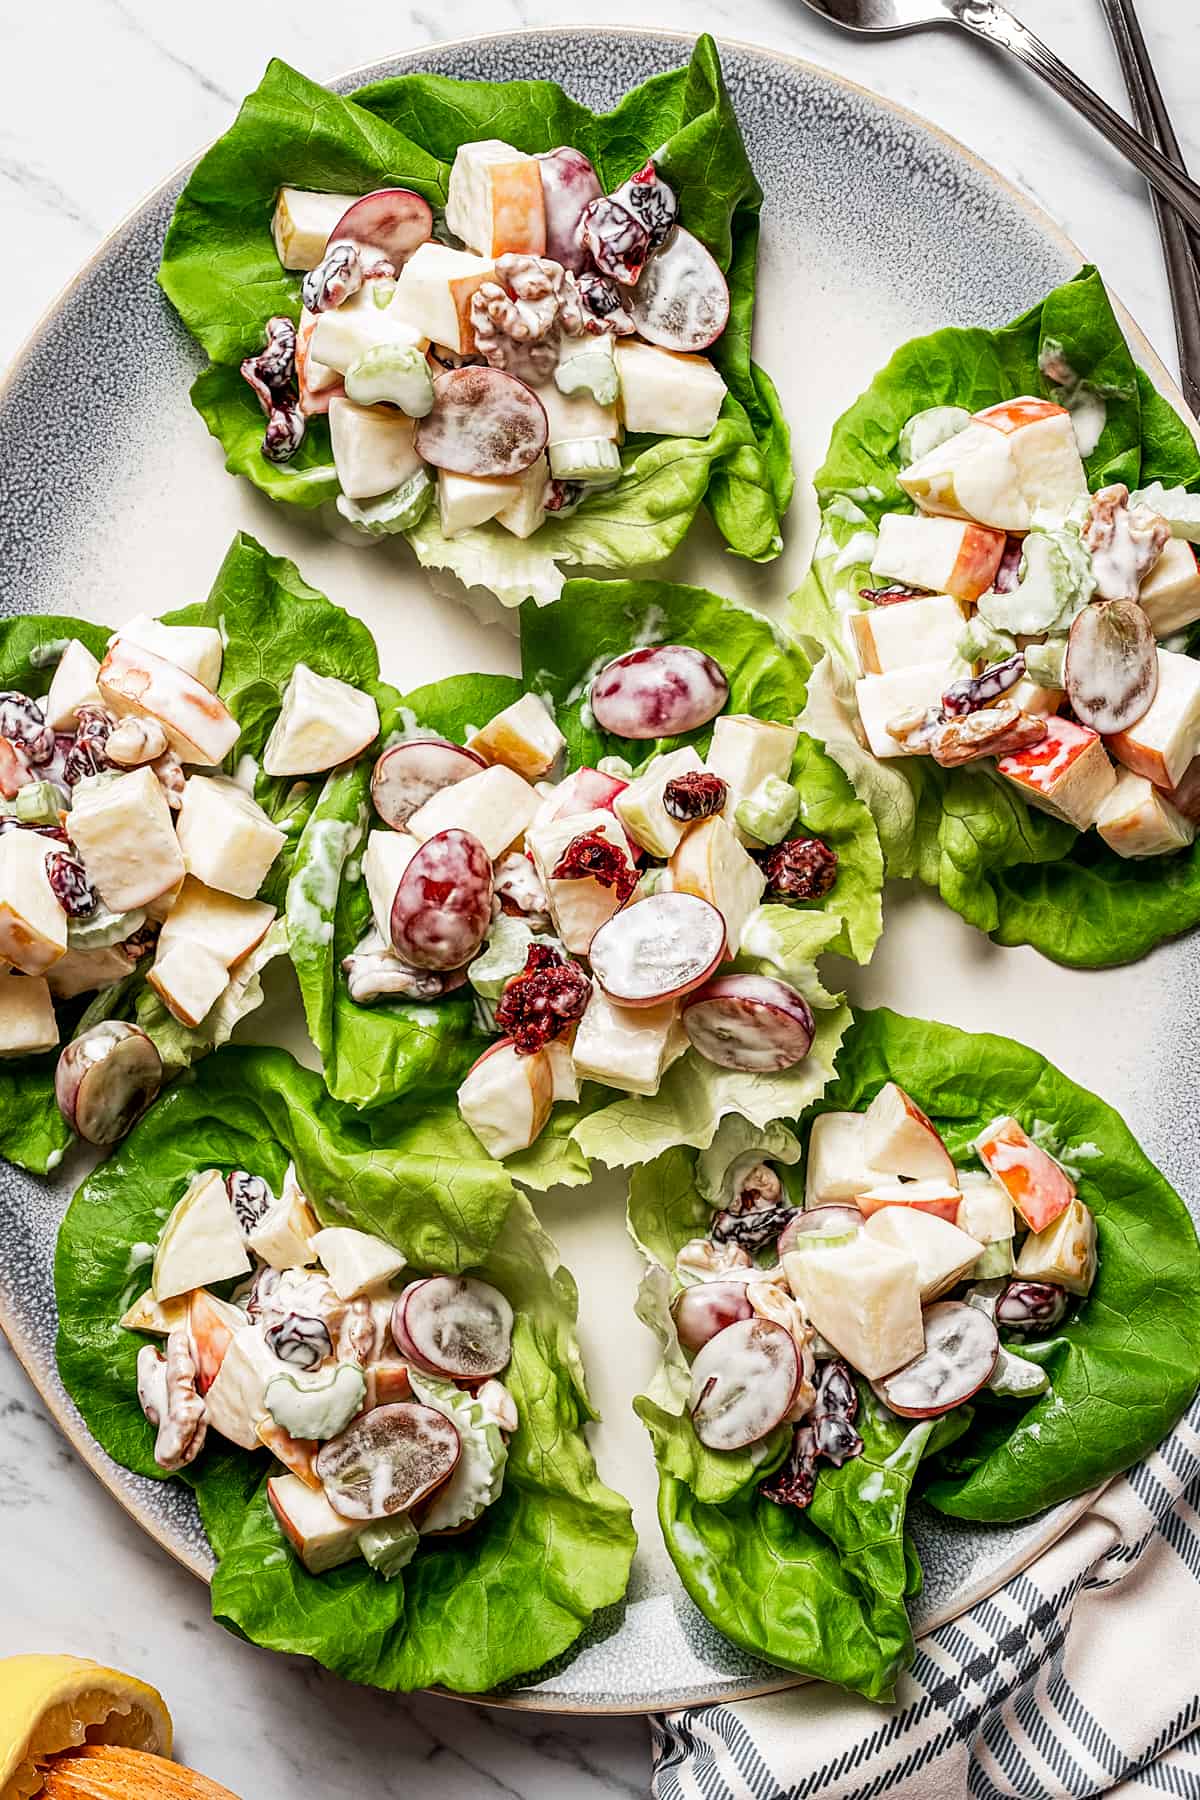 Overhead shot of a platter of Bibb lettuce leaves with servings of creamy fruit salad on each one.